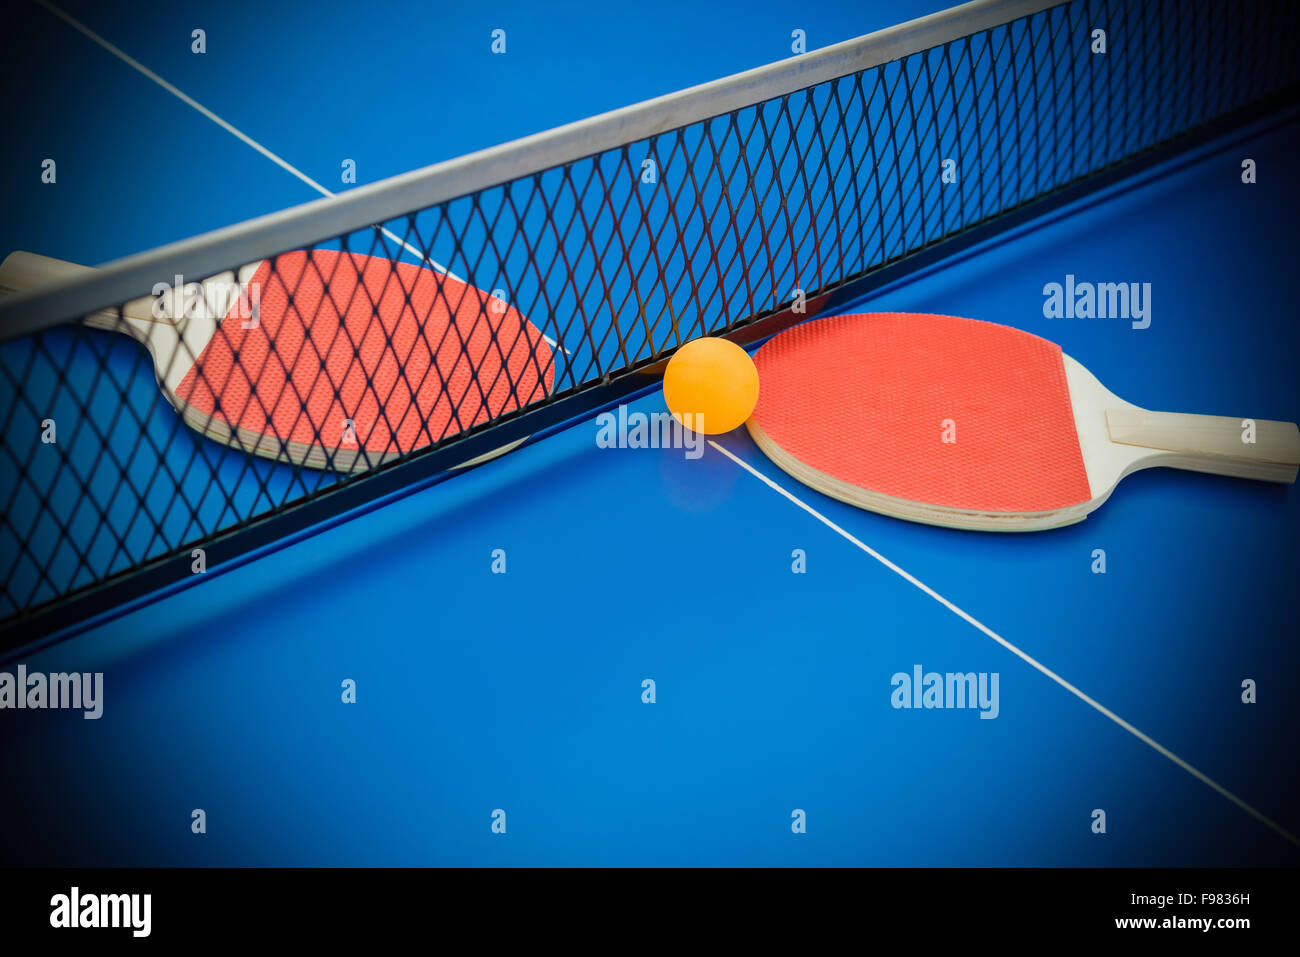 pingpong rackets and ball highlighted on a blue pingpong table Stock Photo